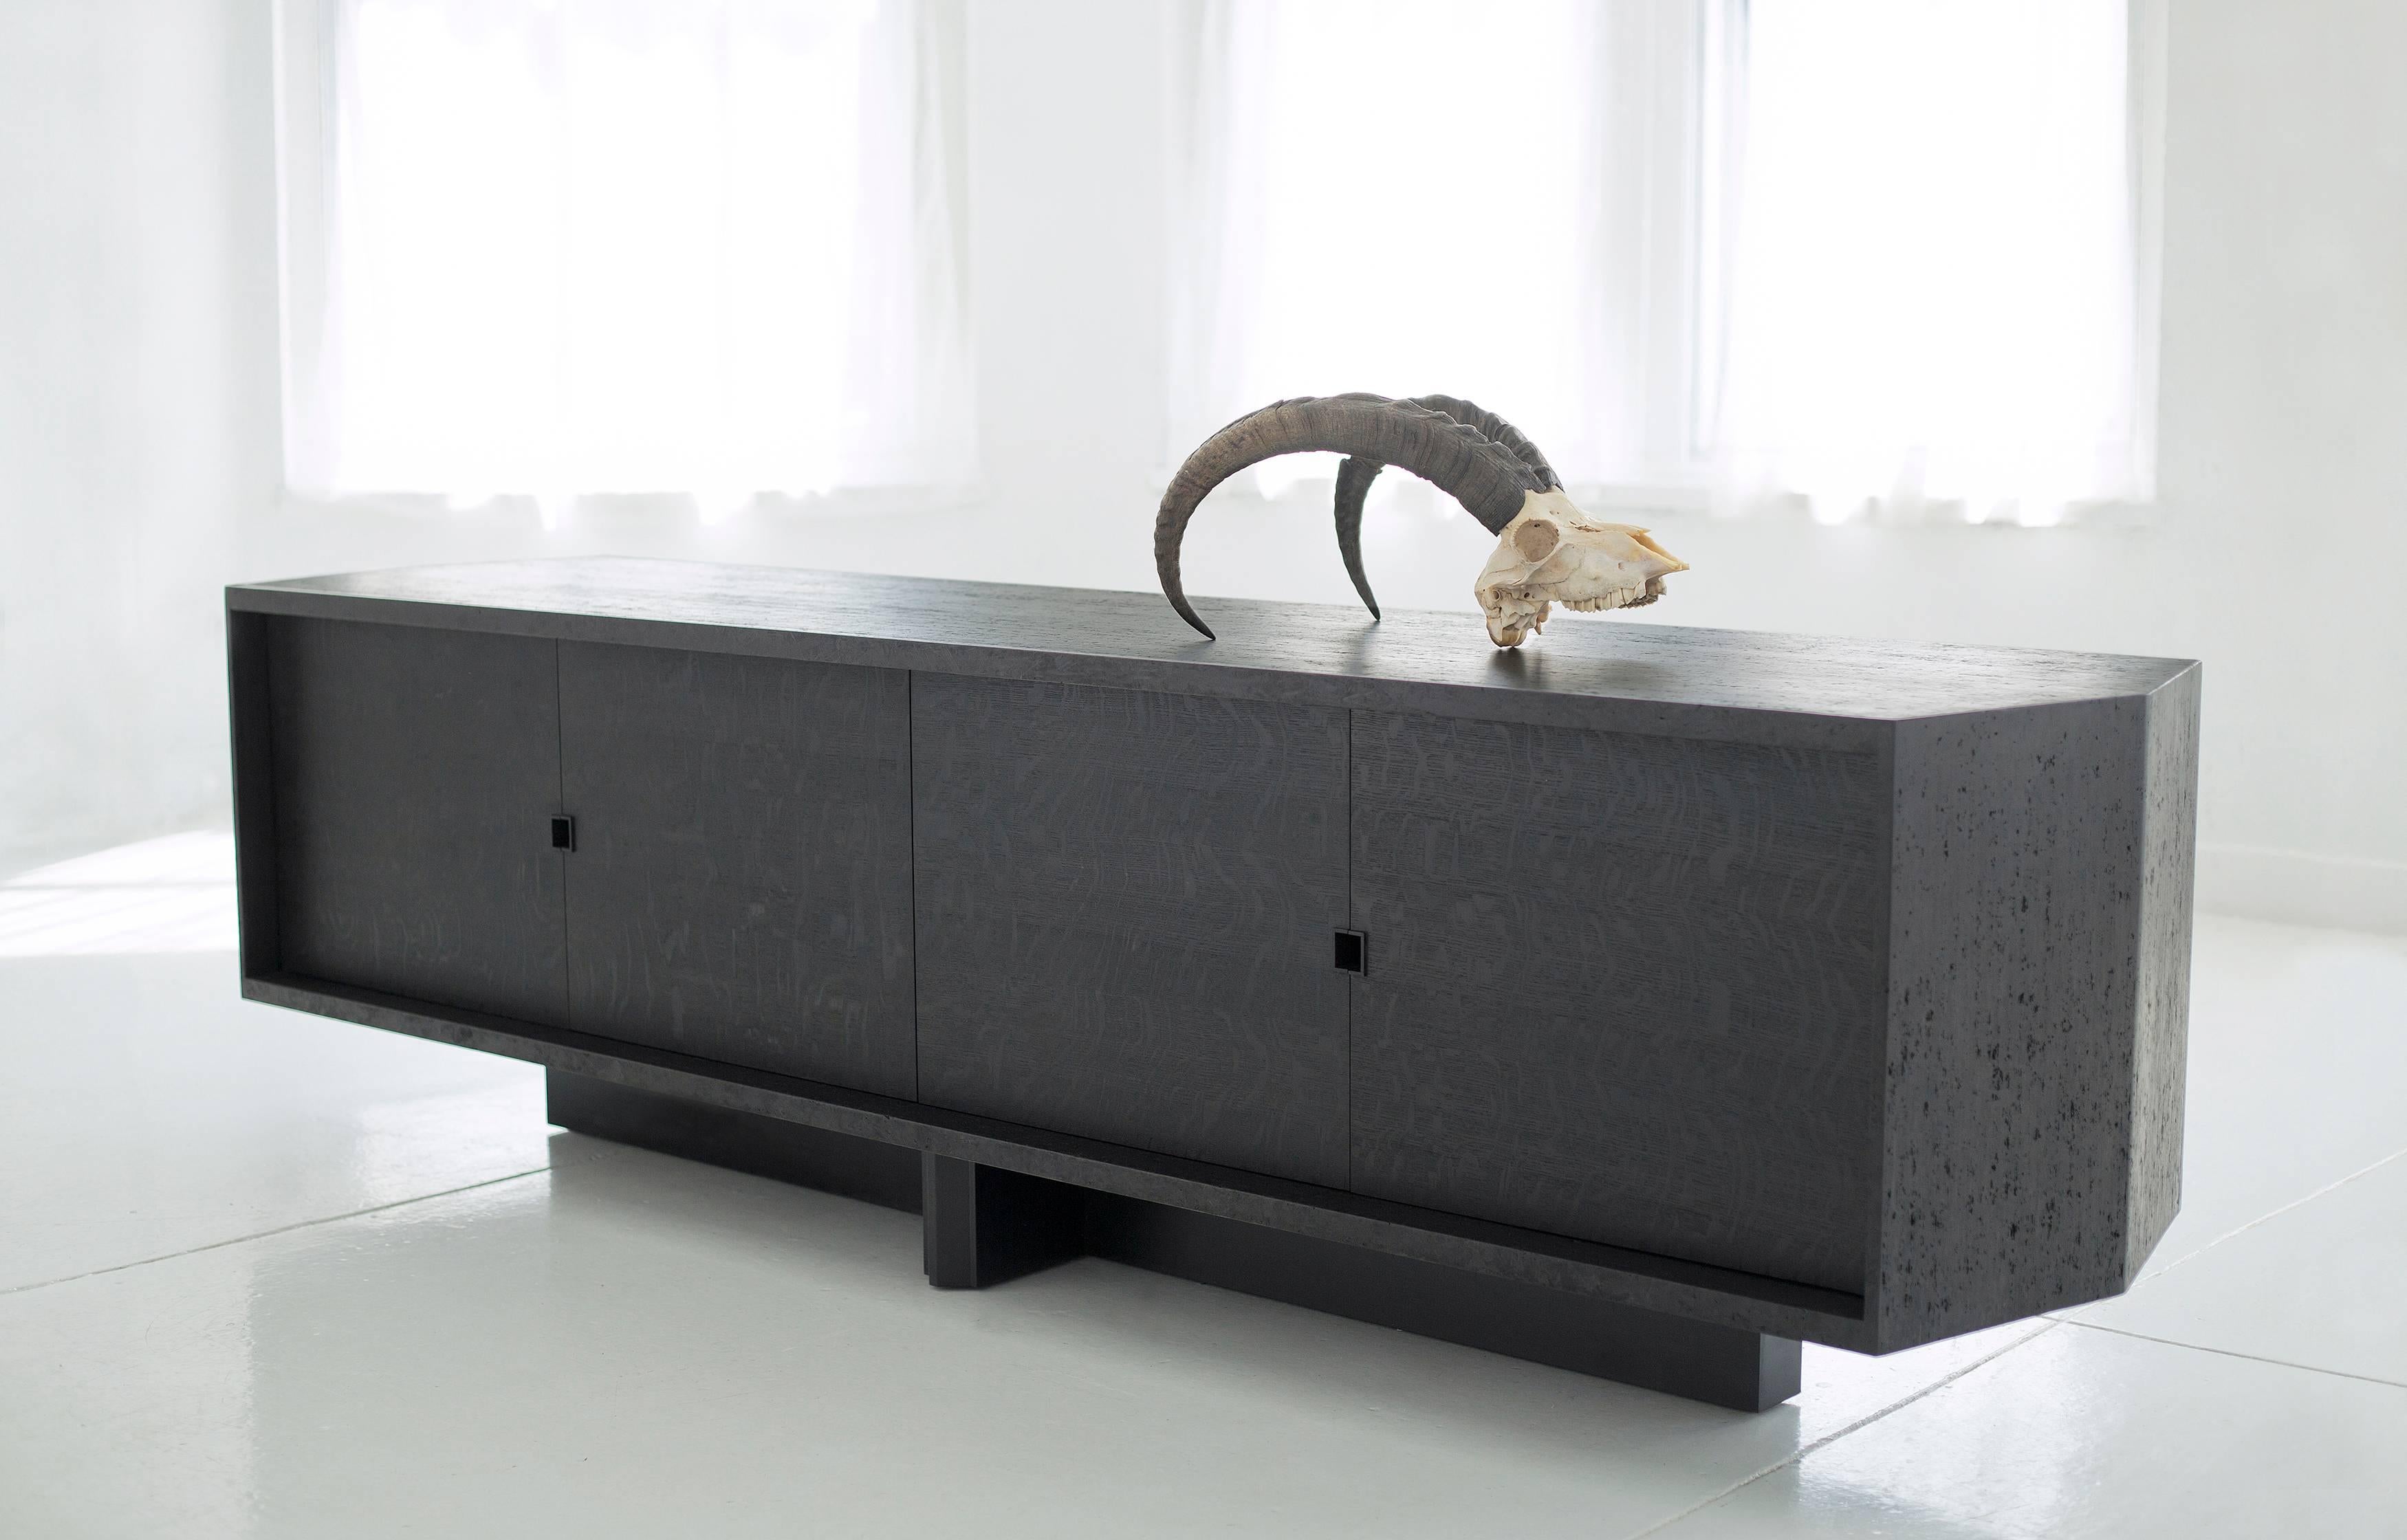 Inspired by Brutalist architecture, the Struttura Credenza utilizes our proprietary *Maykume wood to liken a béton brut aesthetic. 
*MAYKUME is MAY's all wood proprietary material specially developed in-house to resemble smooth, polished stone.